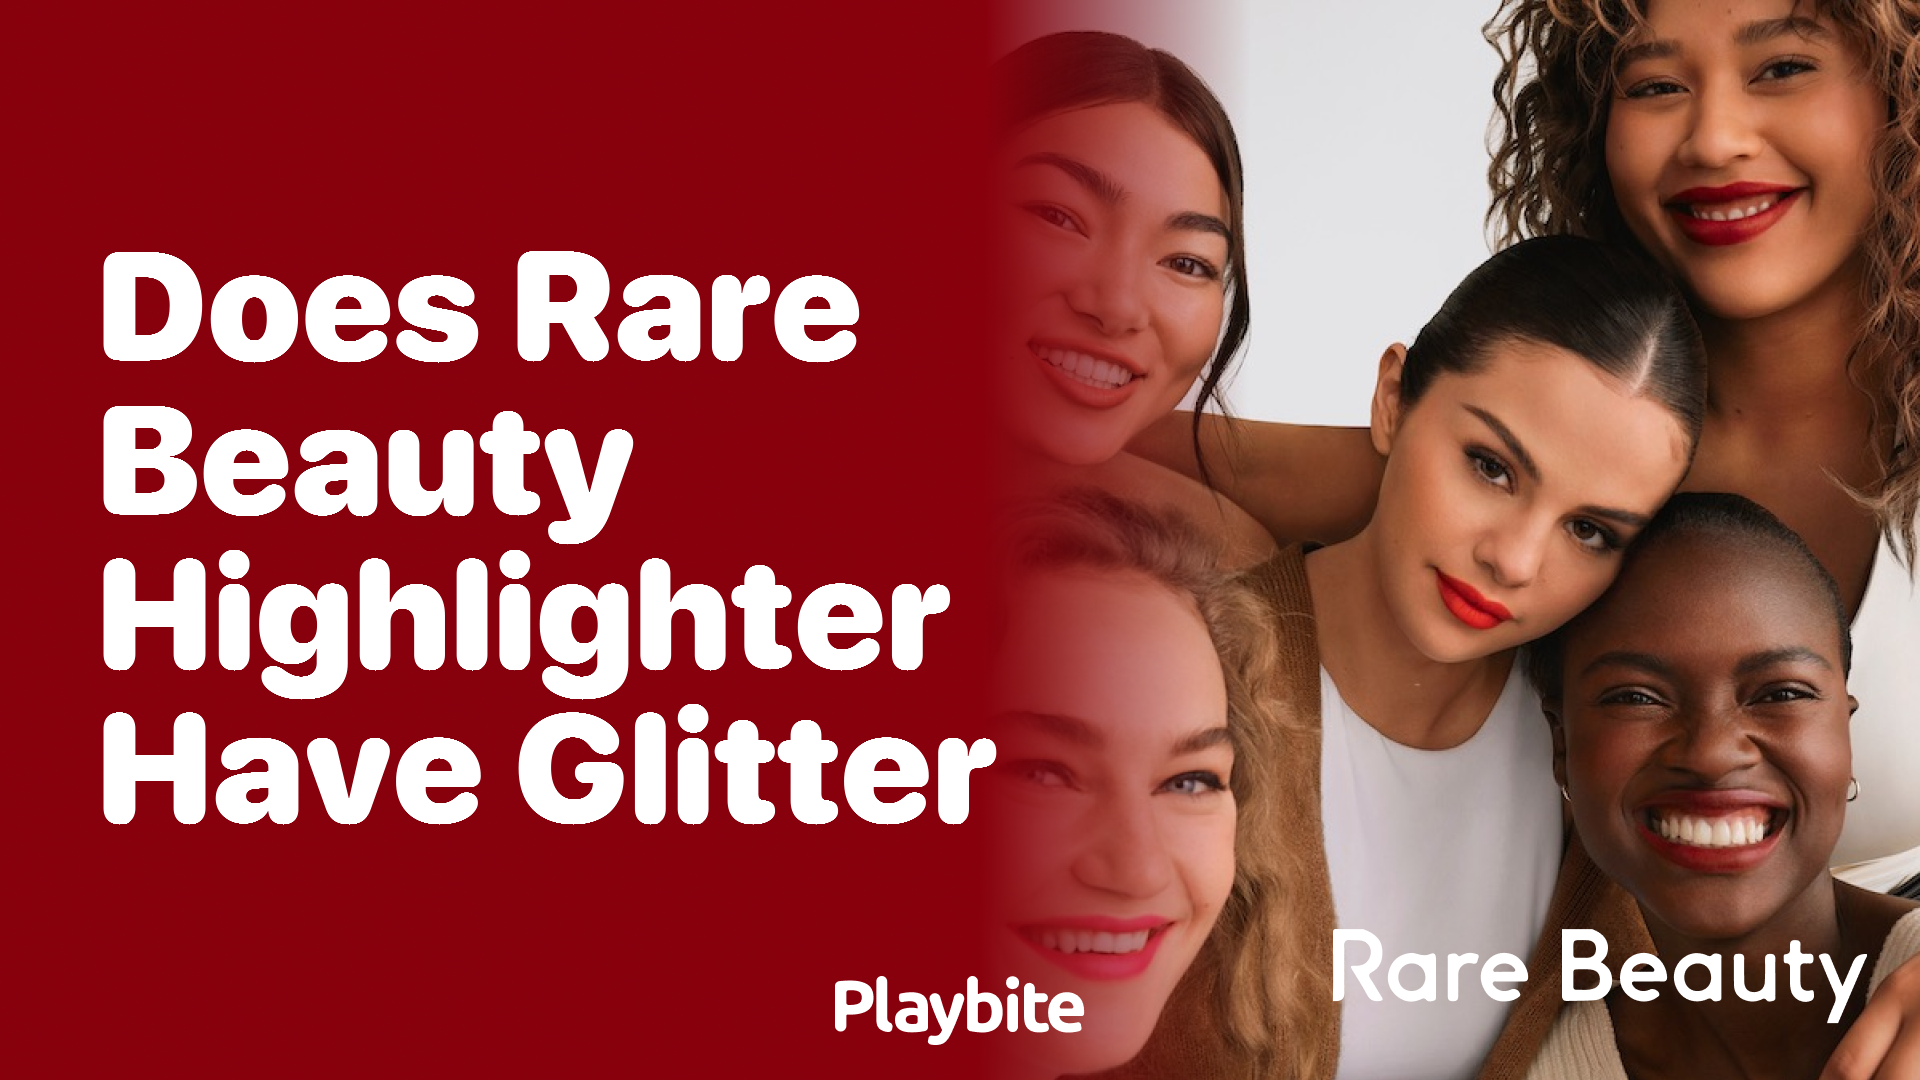 Does Rare Beauty Highlighter Have Glitter?